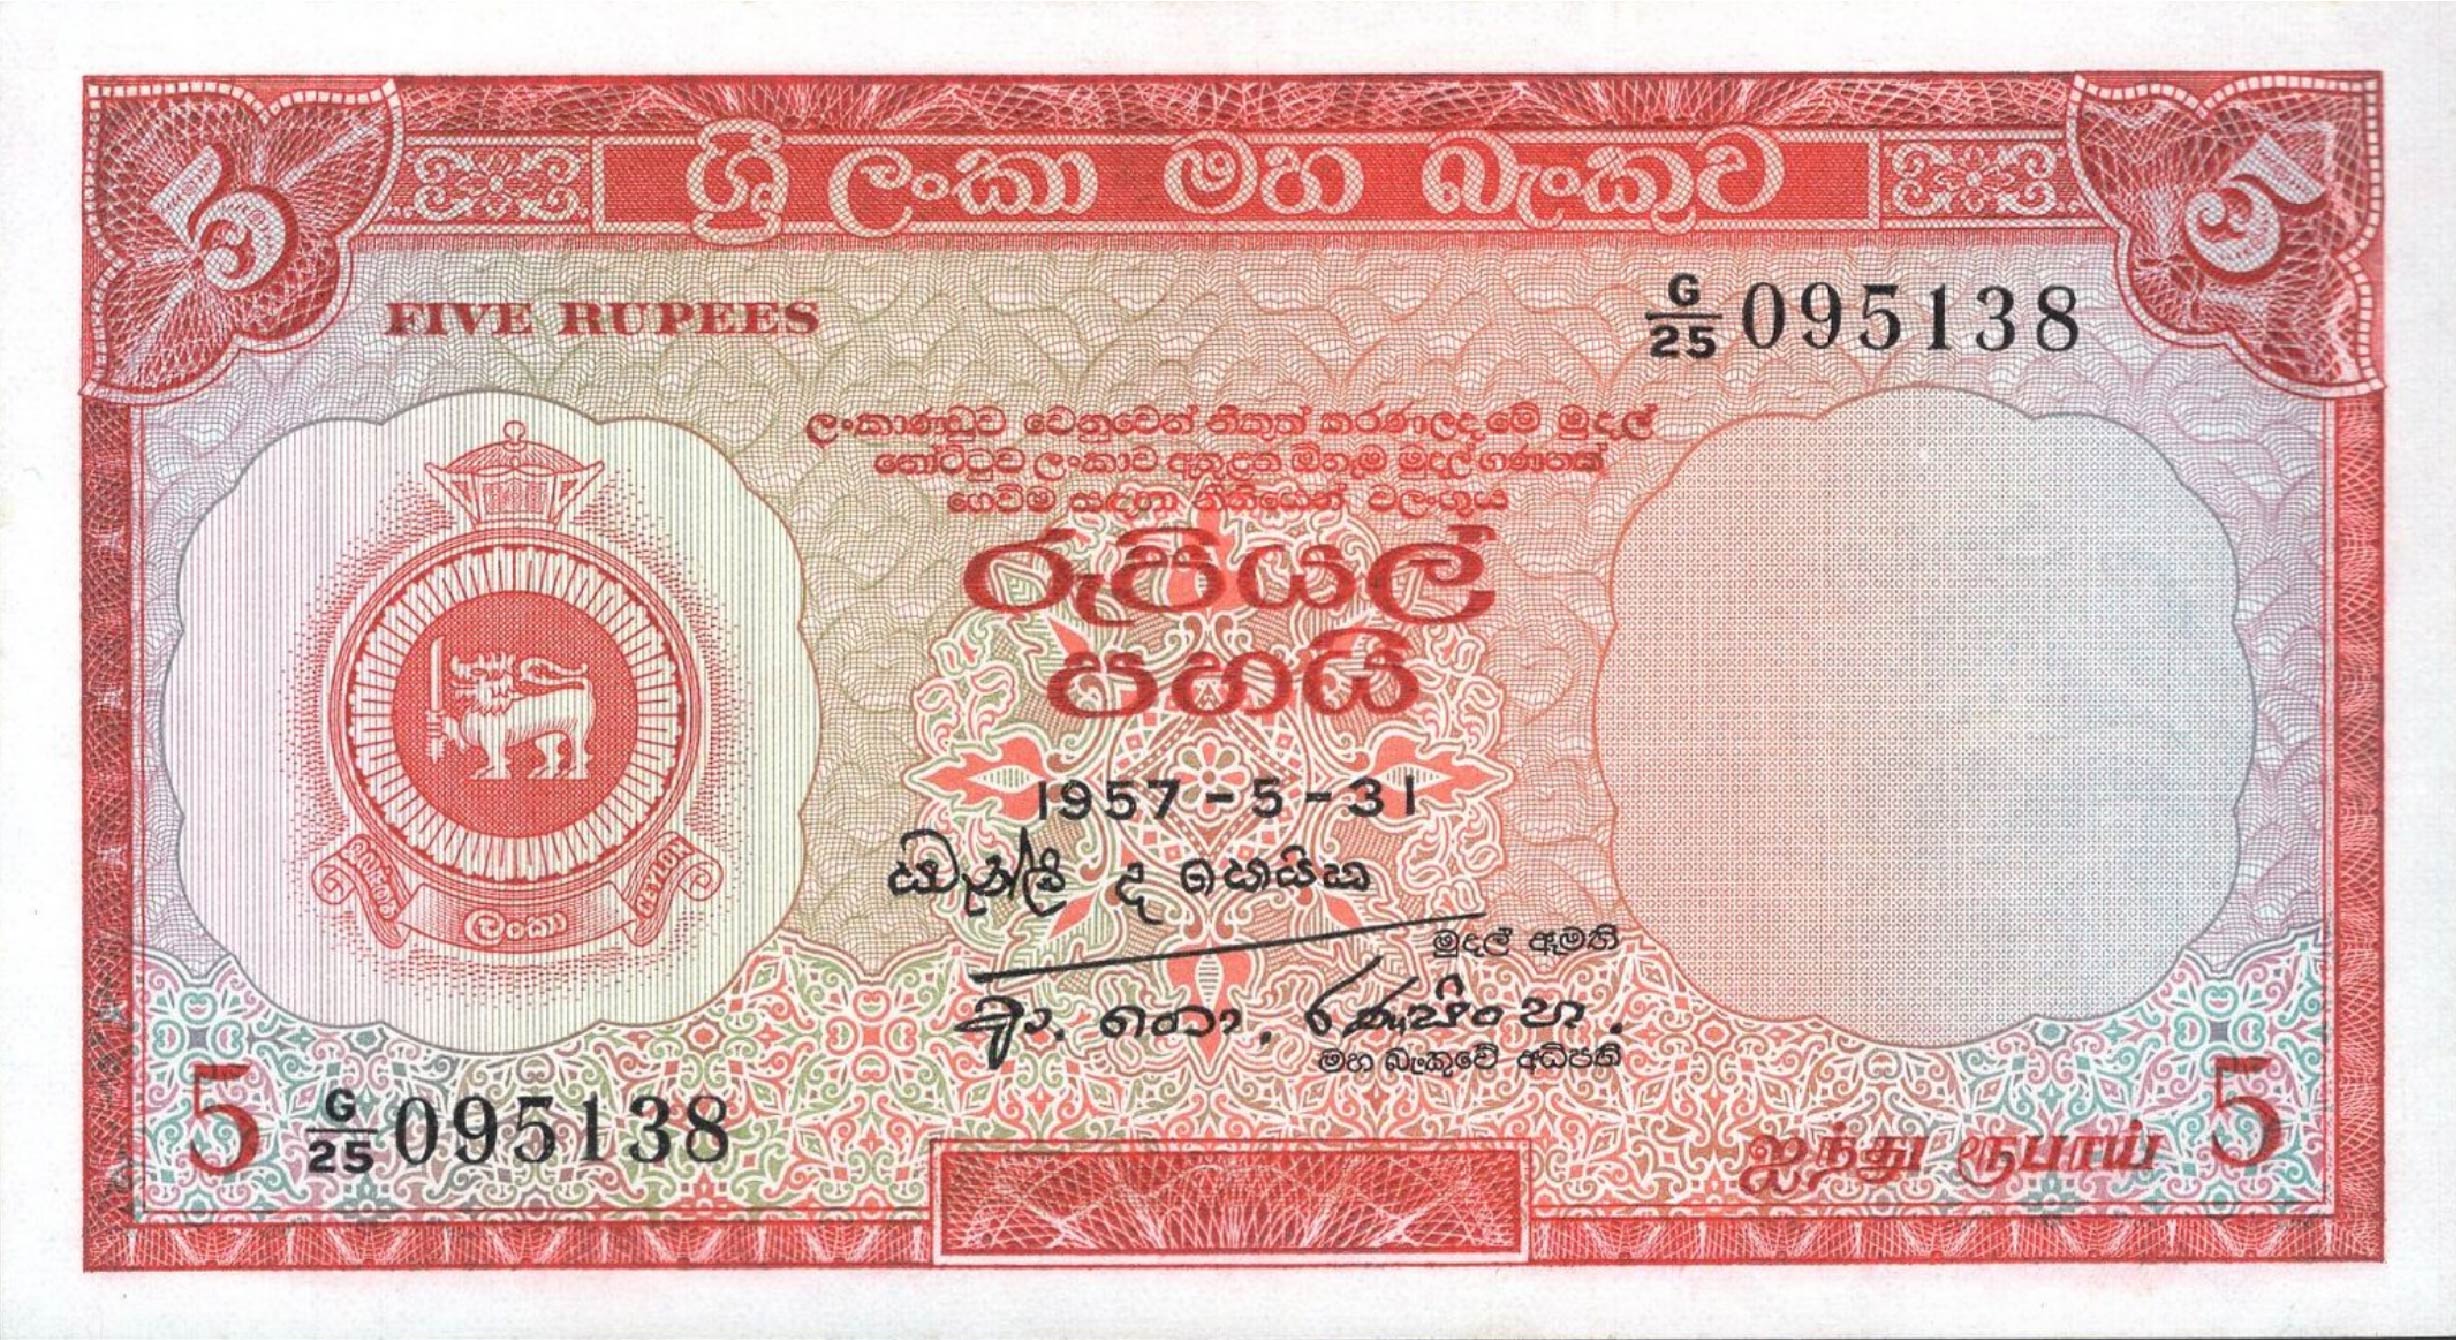 5 rupees Central Bank of Ceylon banknote (Armorial Ensign series)